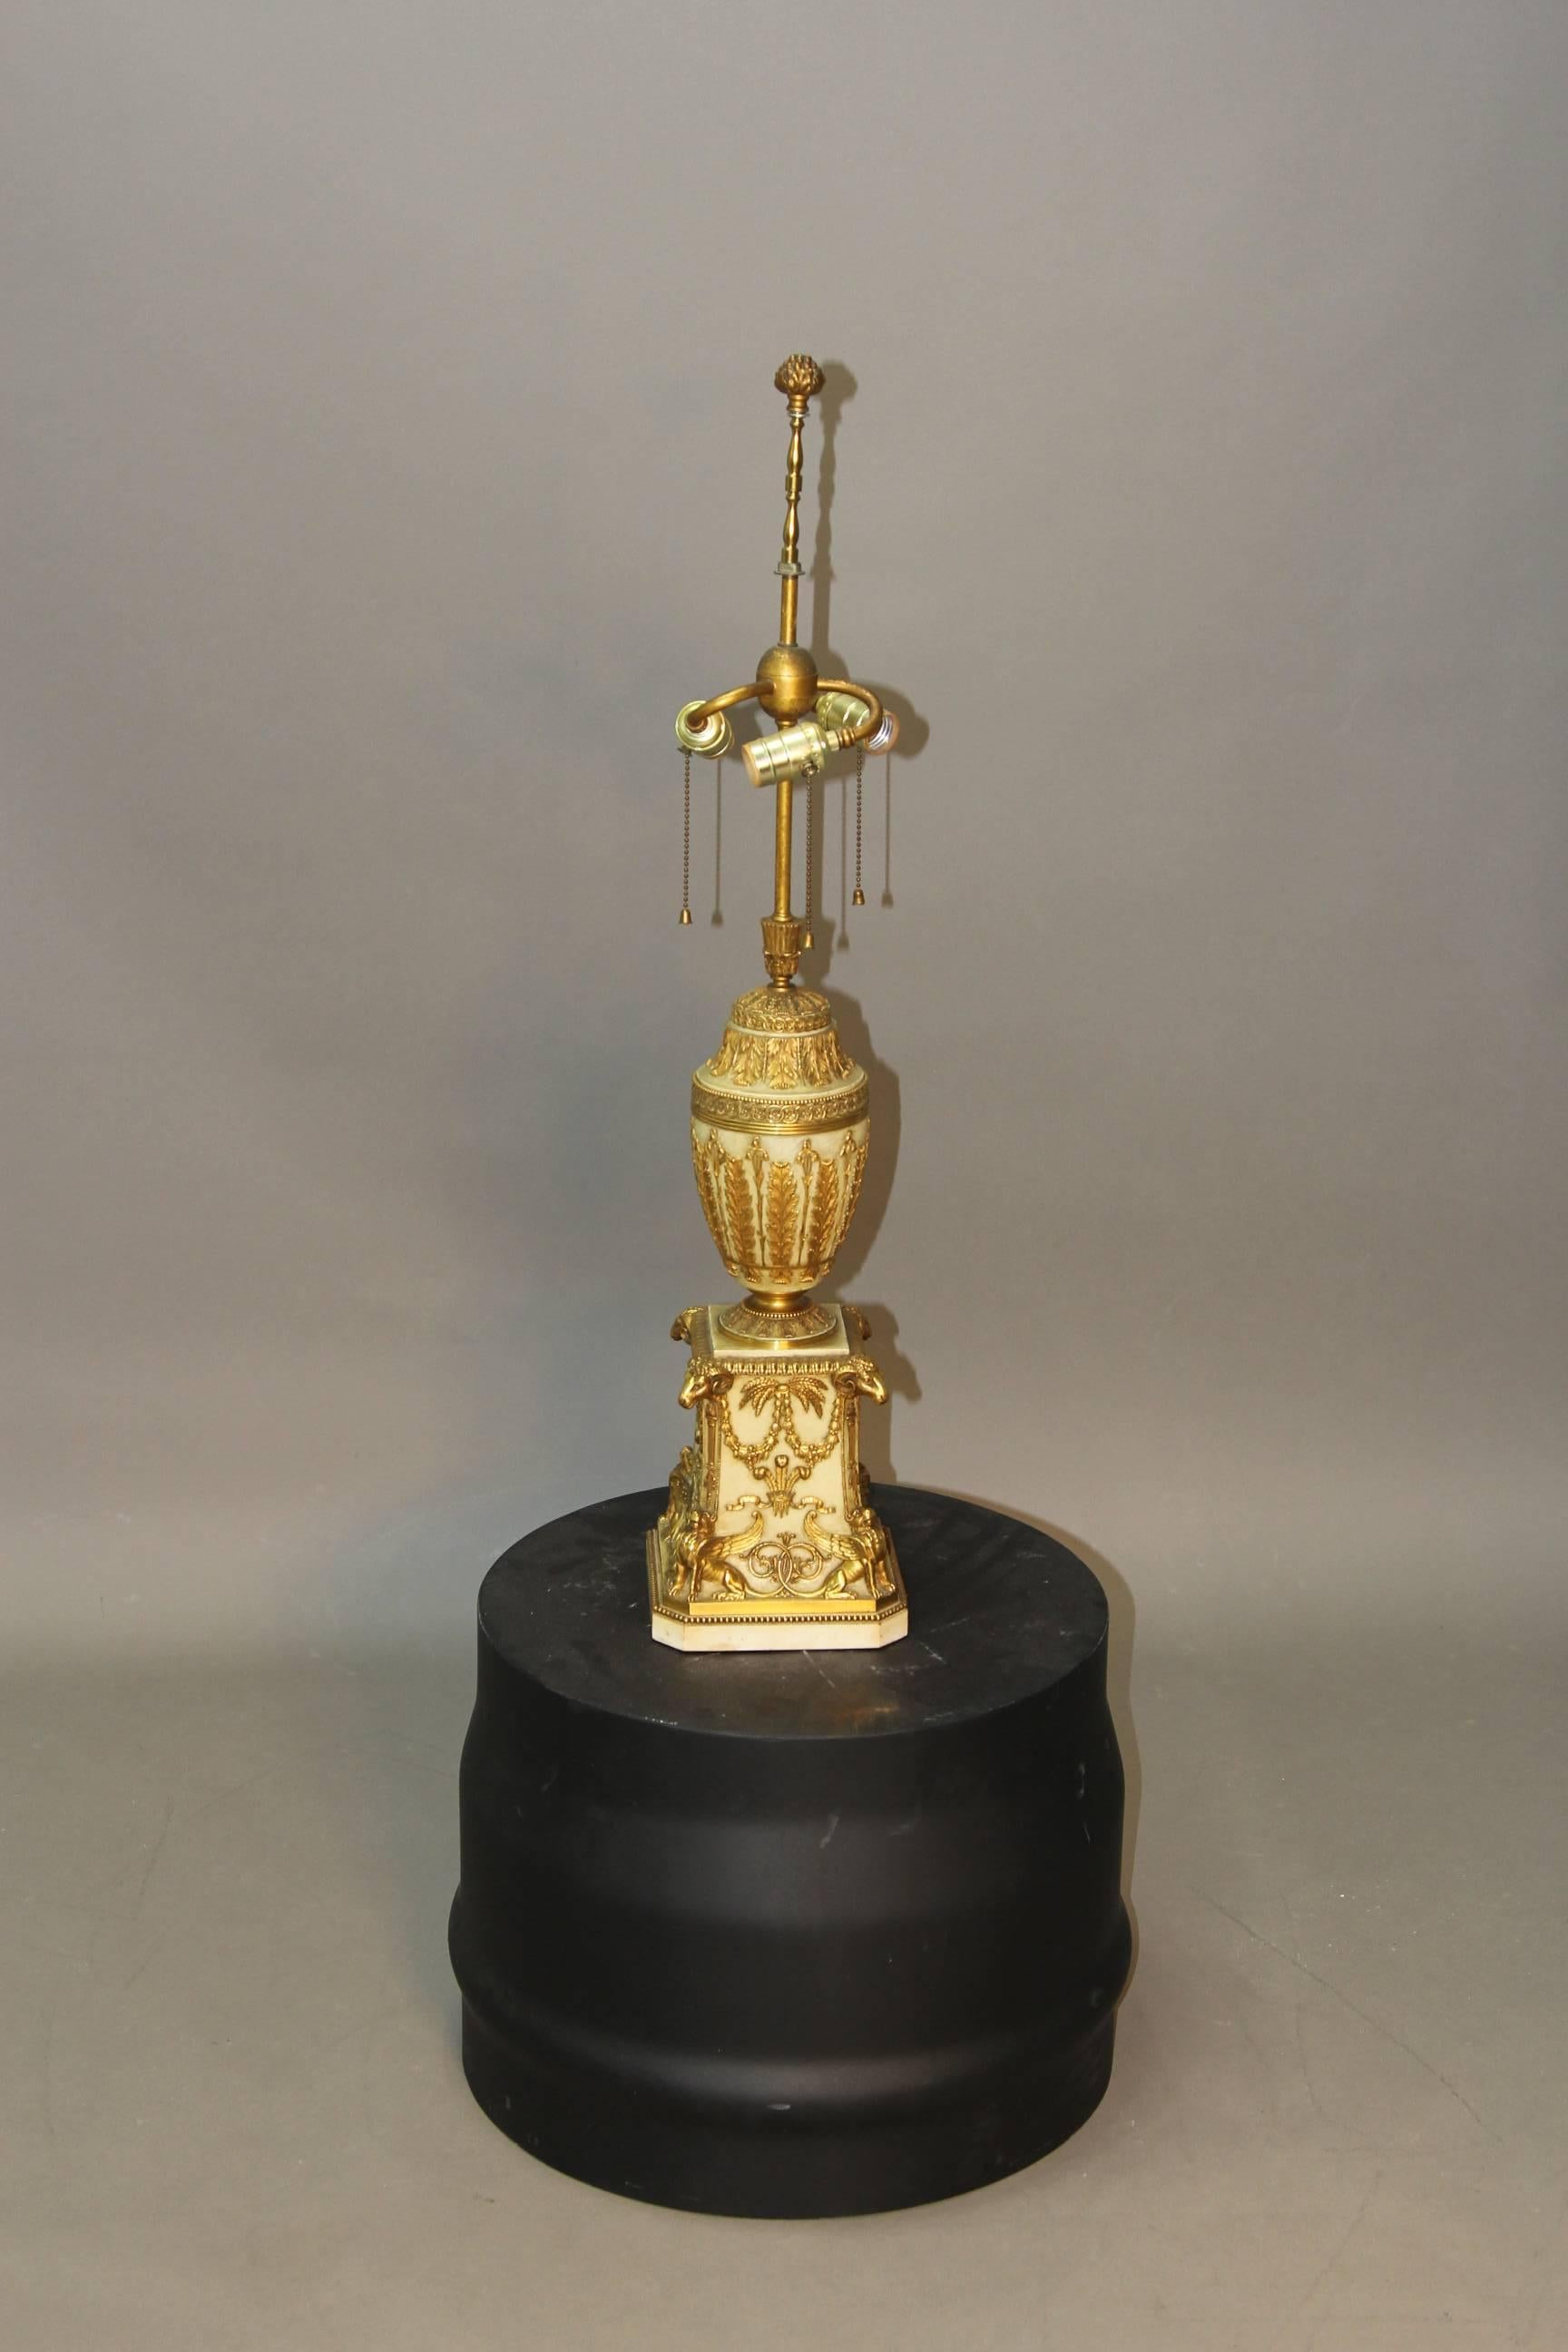 A circa 1900 museum quality ormolu gold gilt bronze lamp with rams head figural applications. In all original condition with original pine cone finial in tact.